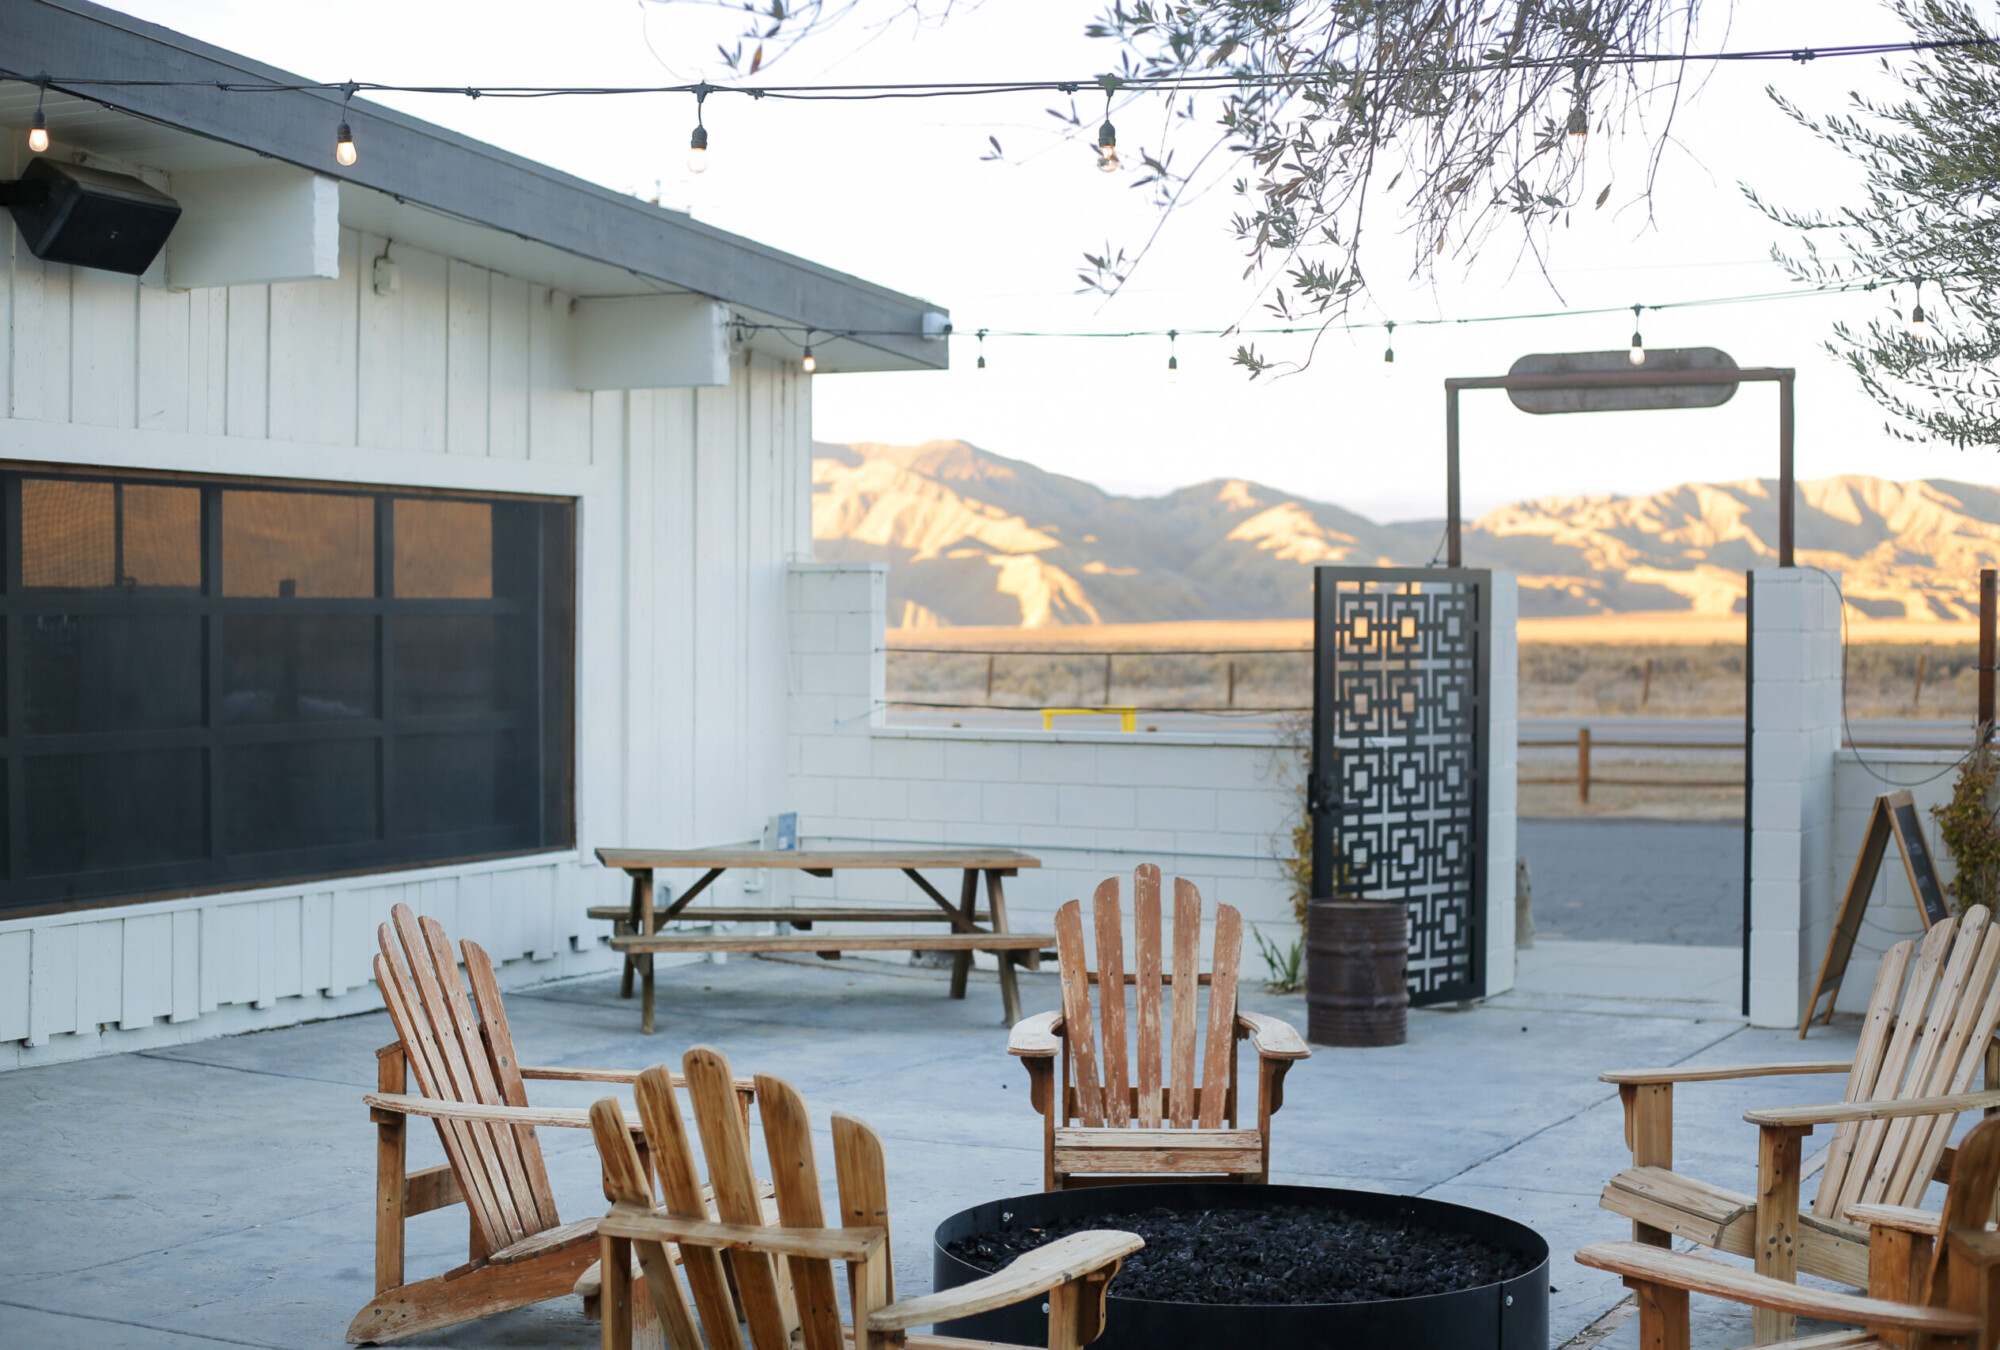 View of the outdoor courtyard with Adirondack chairs and a fire pit with the mountain view in the backdrop at Cuyama Buckhorn in New Cuyama, California.